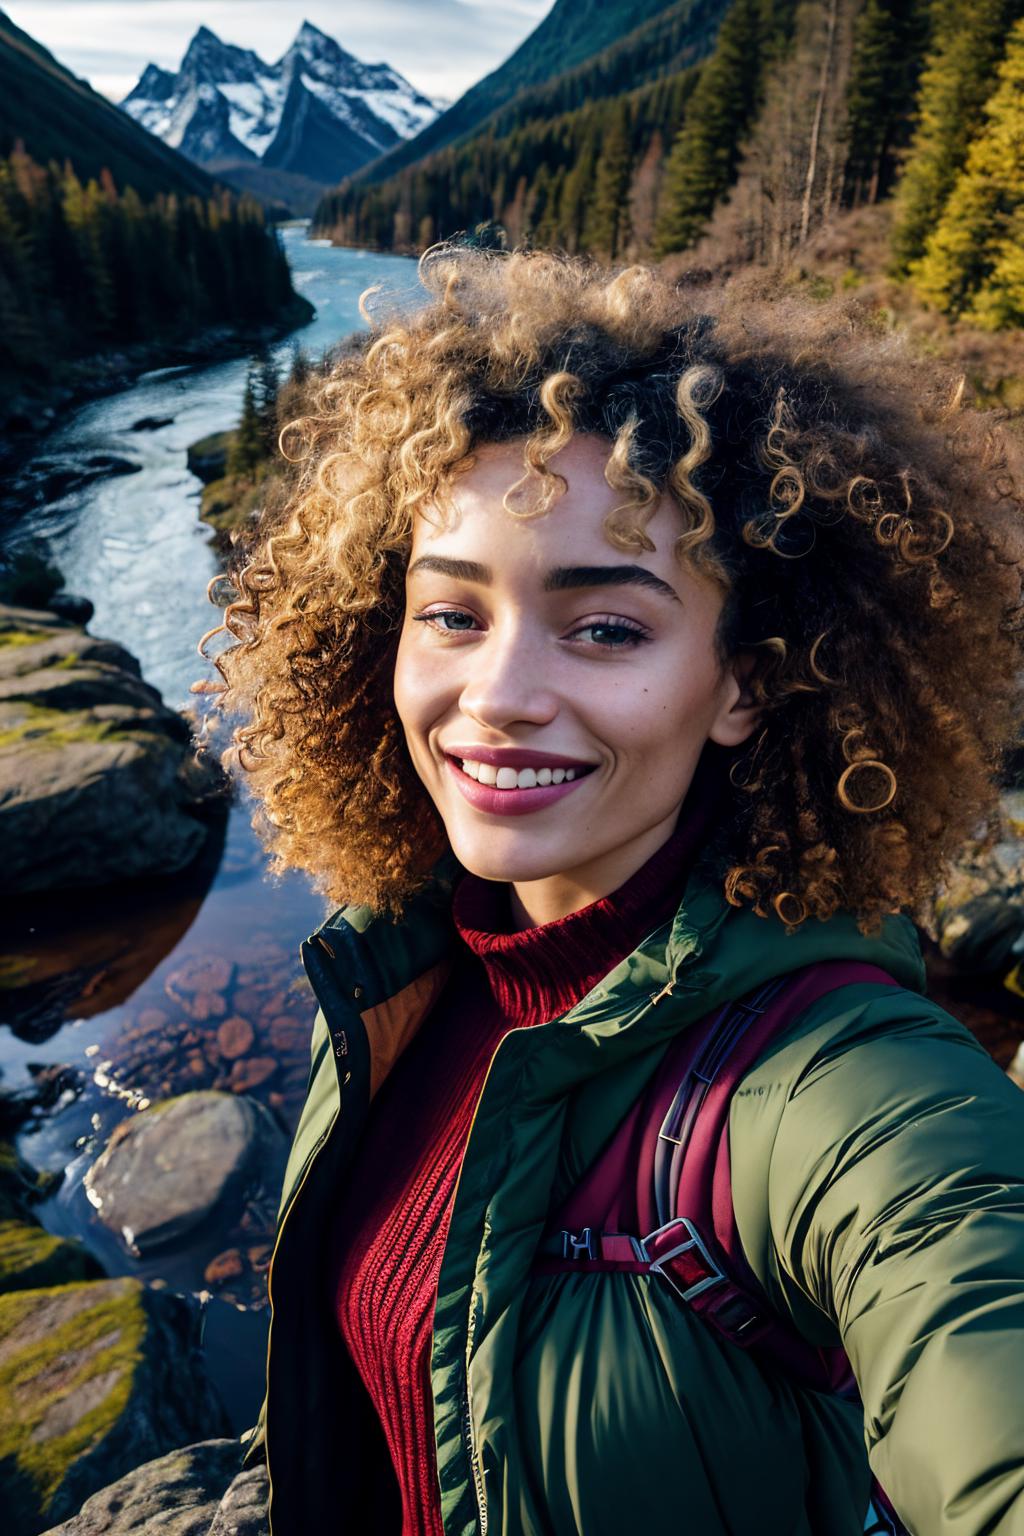 A woman with curly hair wearing a green jacket and a red shirt posing next to a river.